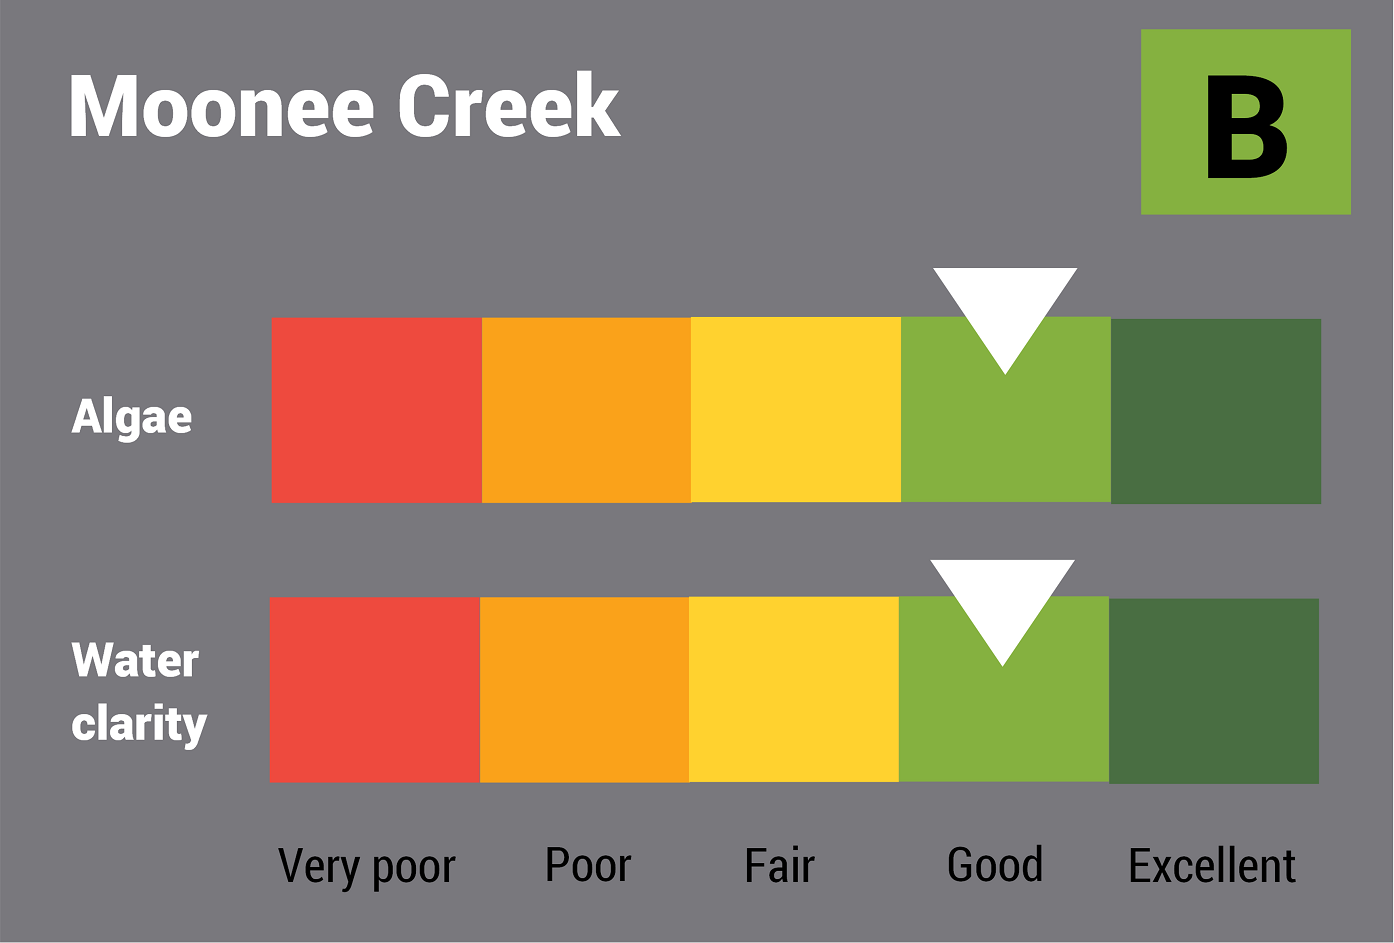 Moonee Creek water quality report card for algae and water clarity showing colour-coded ratings (red, orange, yellow, light green and dark green, which represent very poor, poor, fair, good and excellent, respectively). Algae is rated 'good' and water clarity is rated 'good' giving an overall rating of 'good' or 'B'.